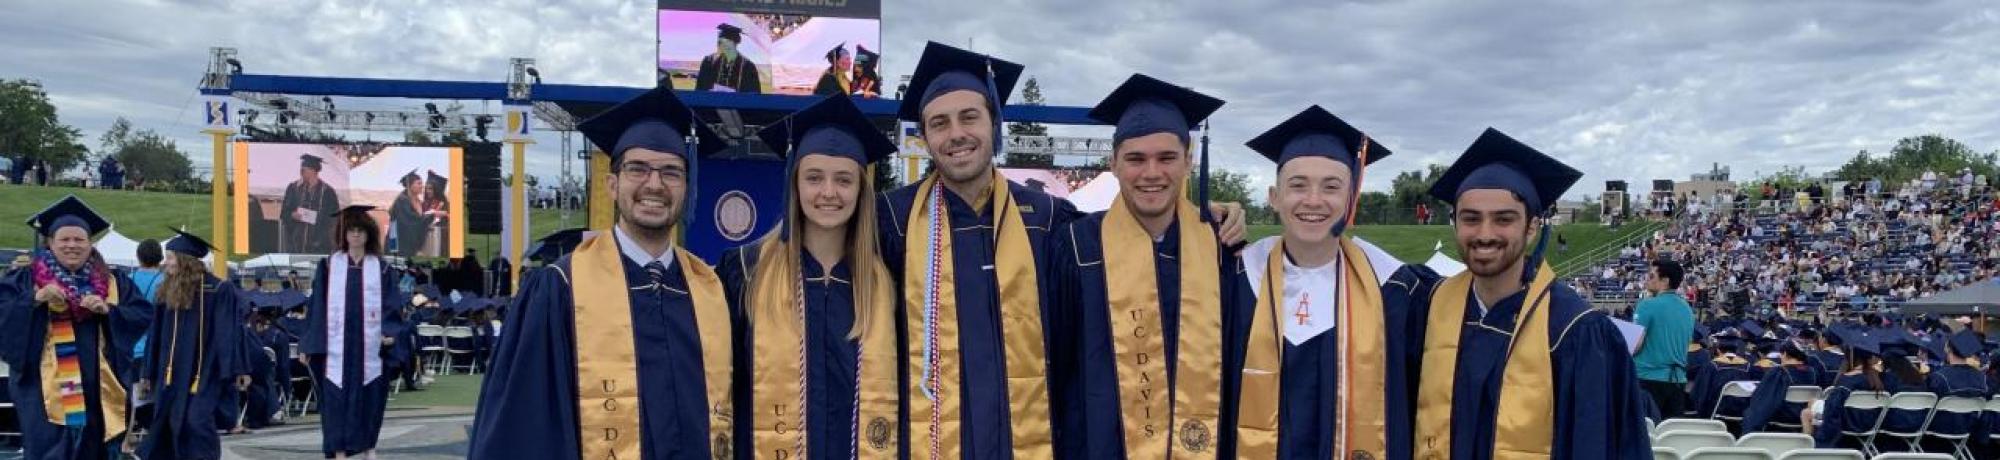 Students stand together for UC Davis commencement